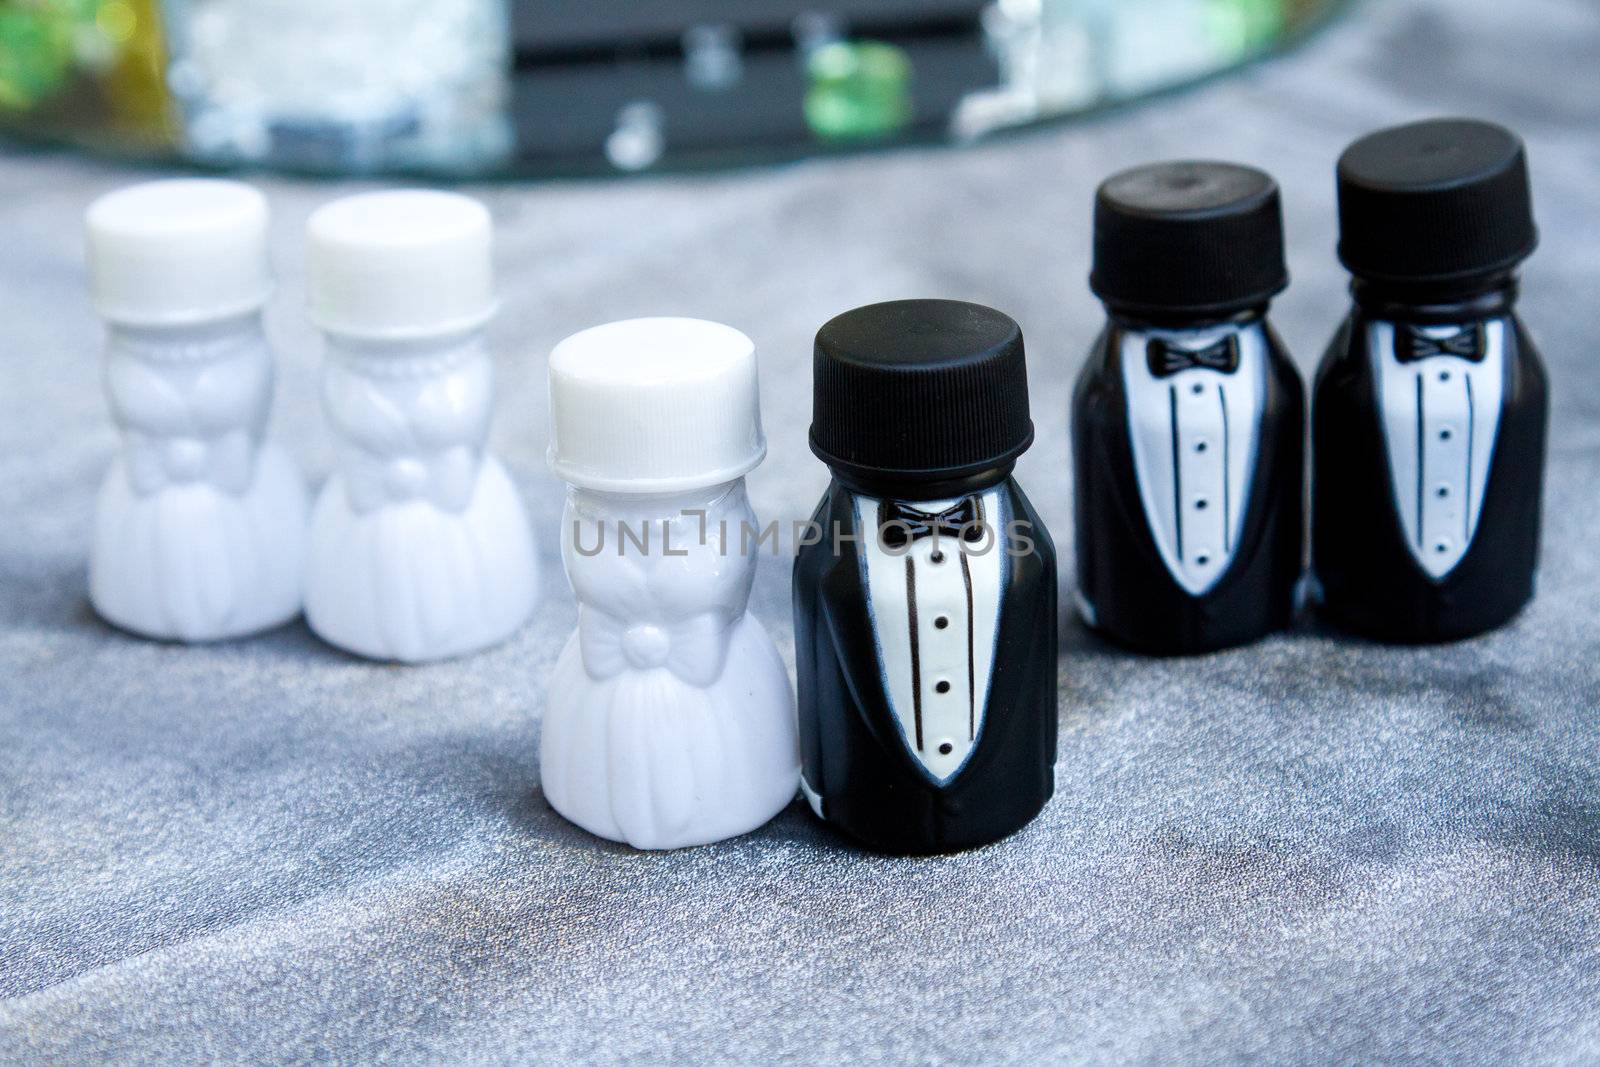 These party favors are containers of bubbles at a wedding. The photographs here represent the bridal party lined up together.